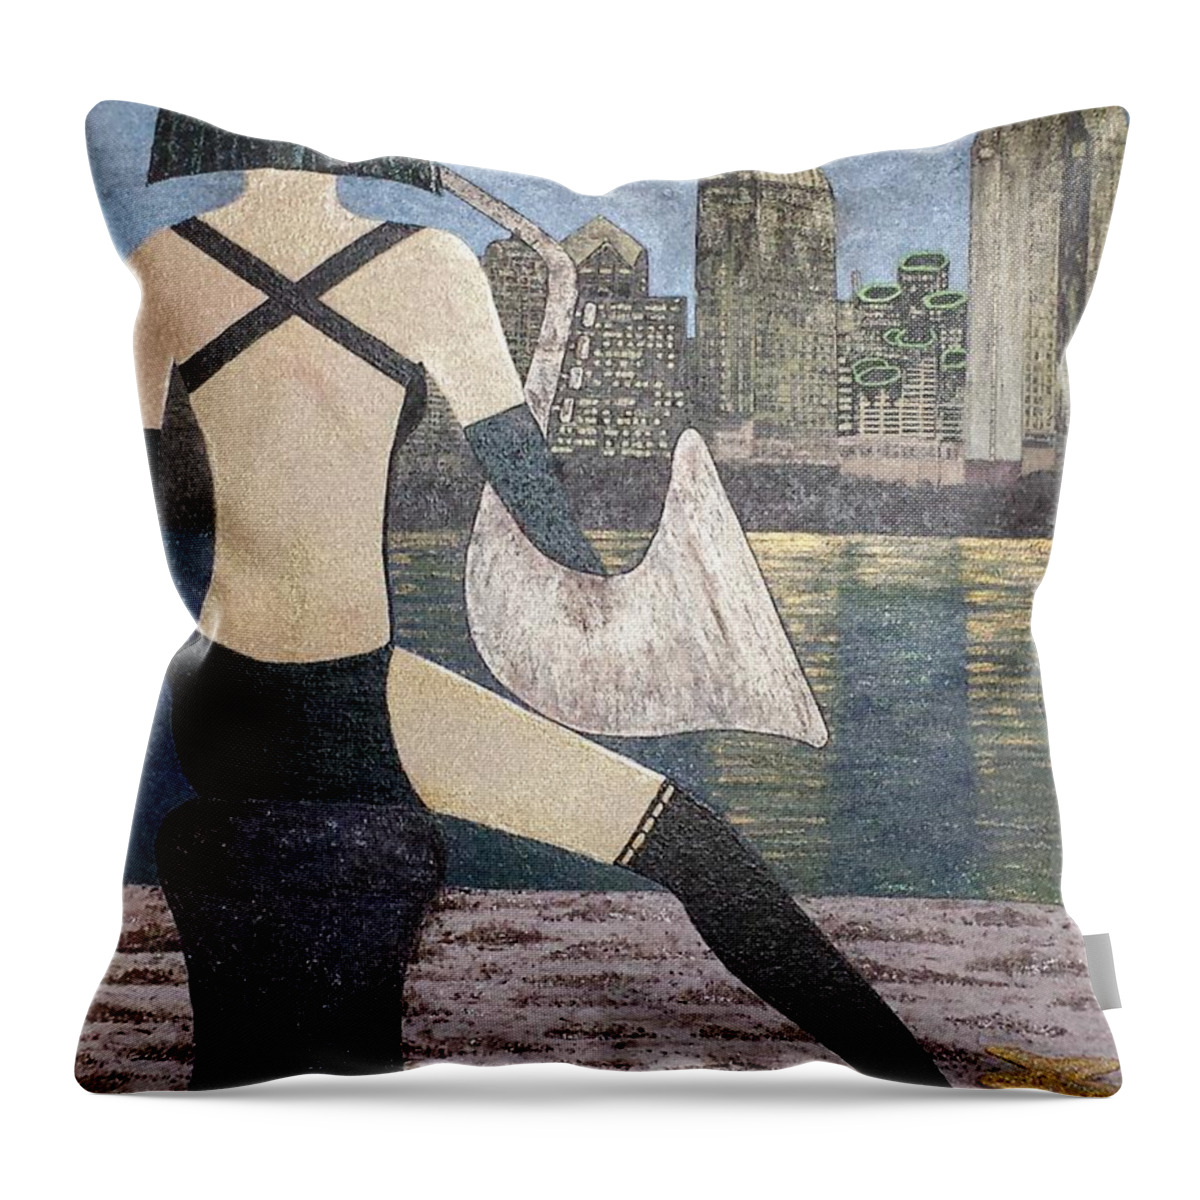 San Diego Throw Pillow featuring the painting San Diego California by Jasna Gopic